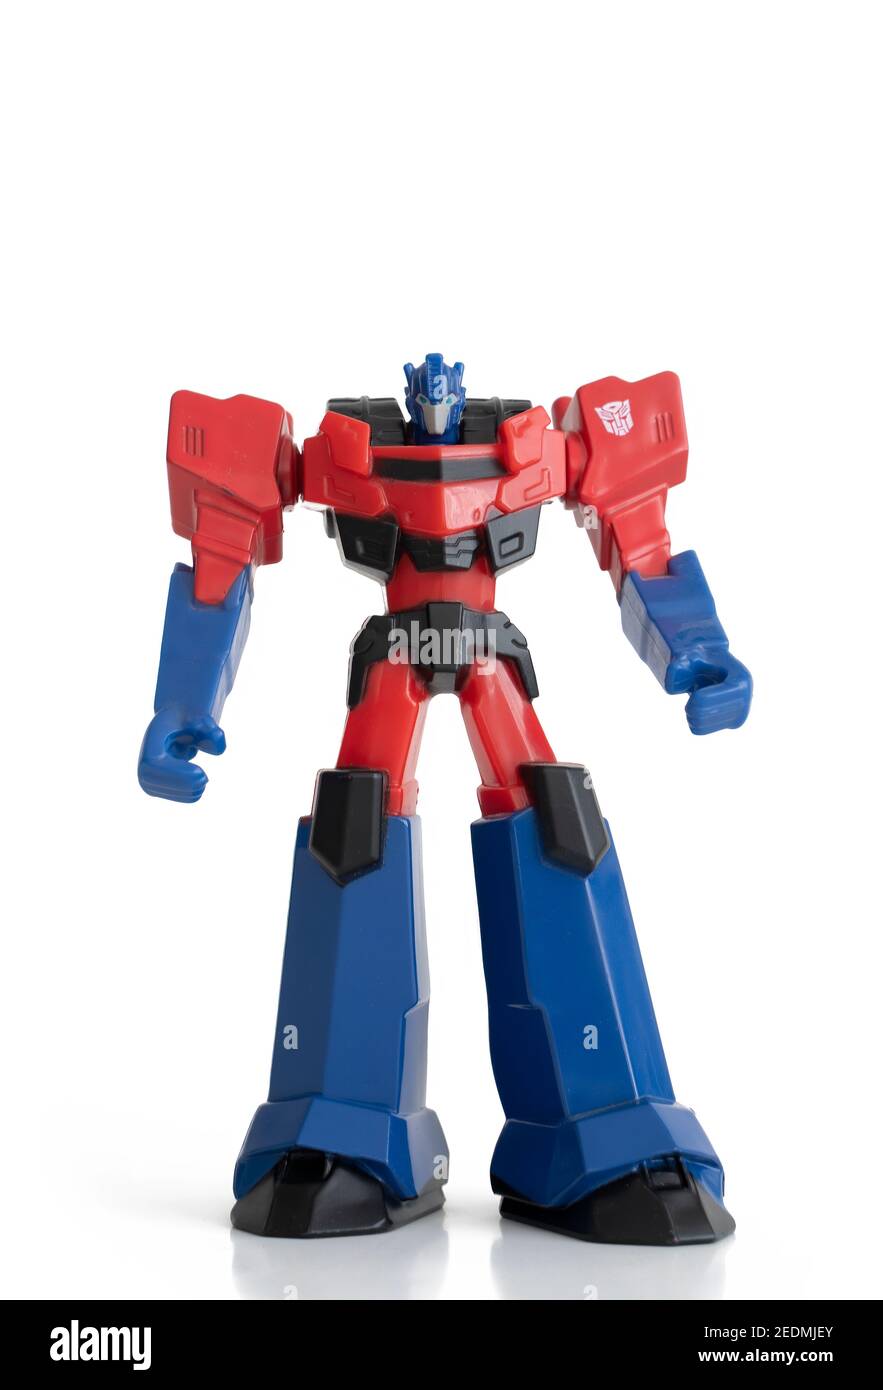 Optimus Prime collectable toy figure from Transformers franchise, an American and Japanese media franchise produced by Hasbro and Takara Tomy. Stock Photo